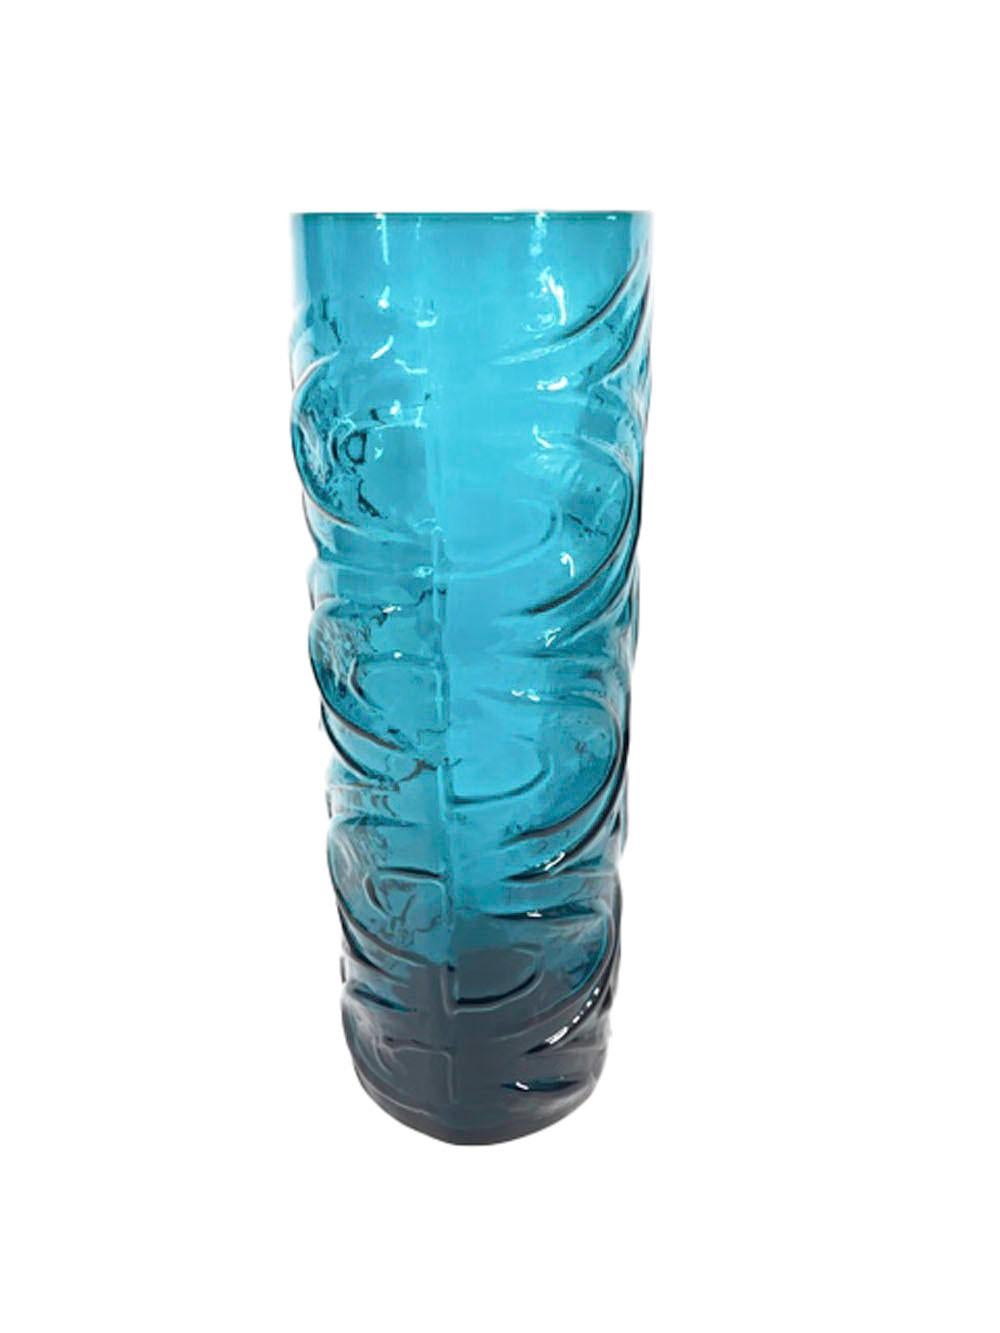 Large Mid-Century Cylindrical Kingfisher Blue Vase with Molded Wave Pattern In Good Condition For Sale In Nantucket, MA